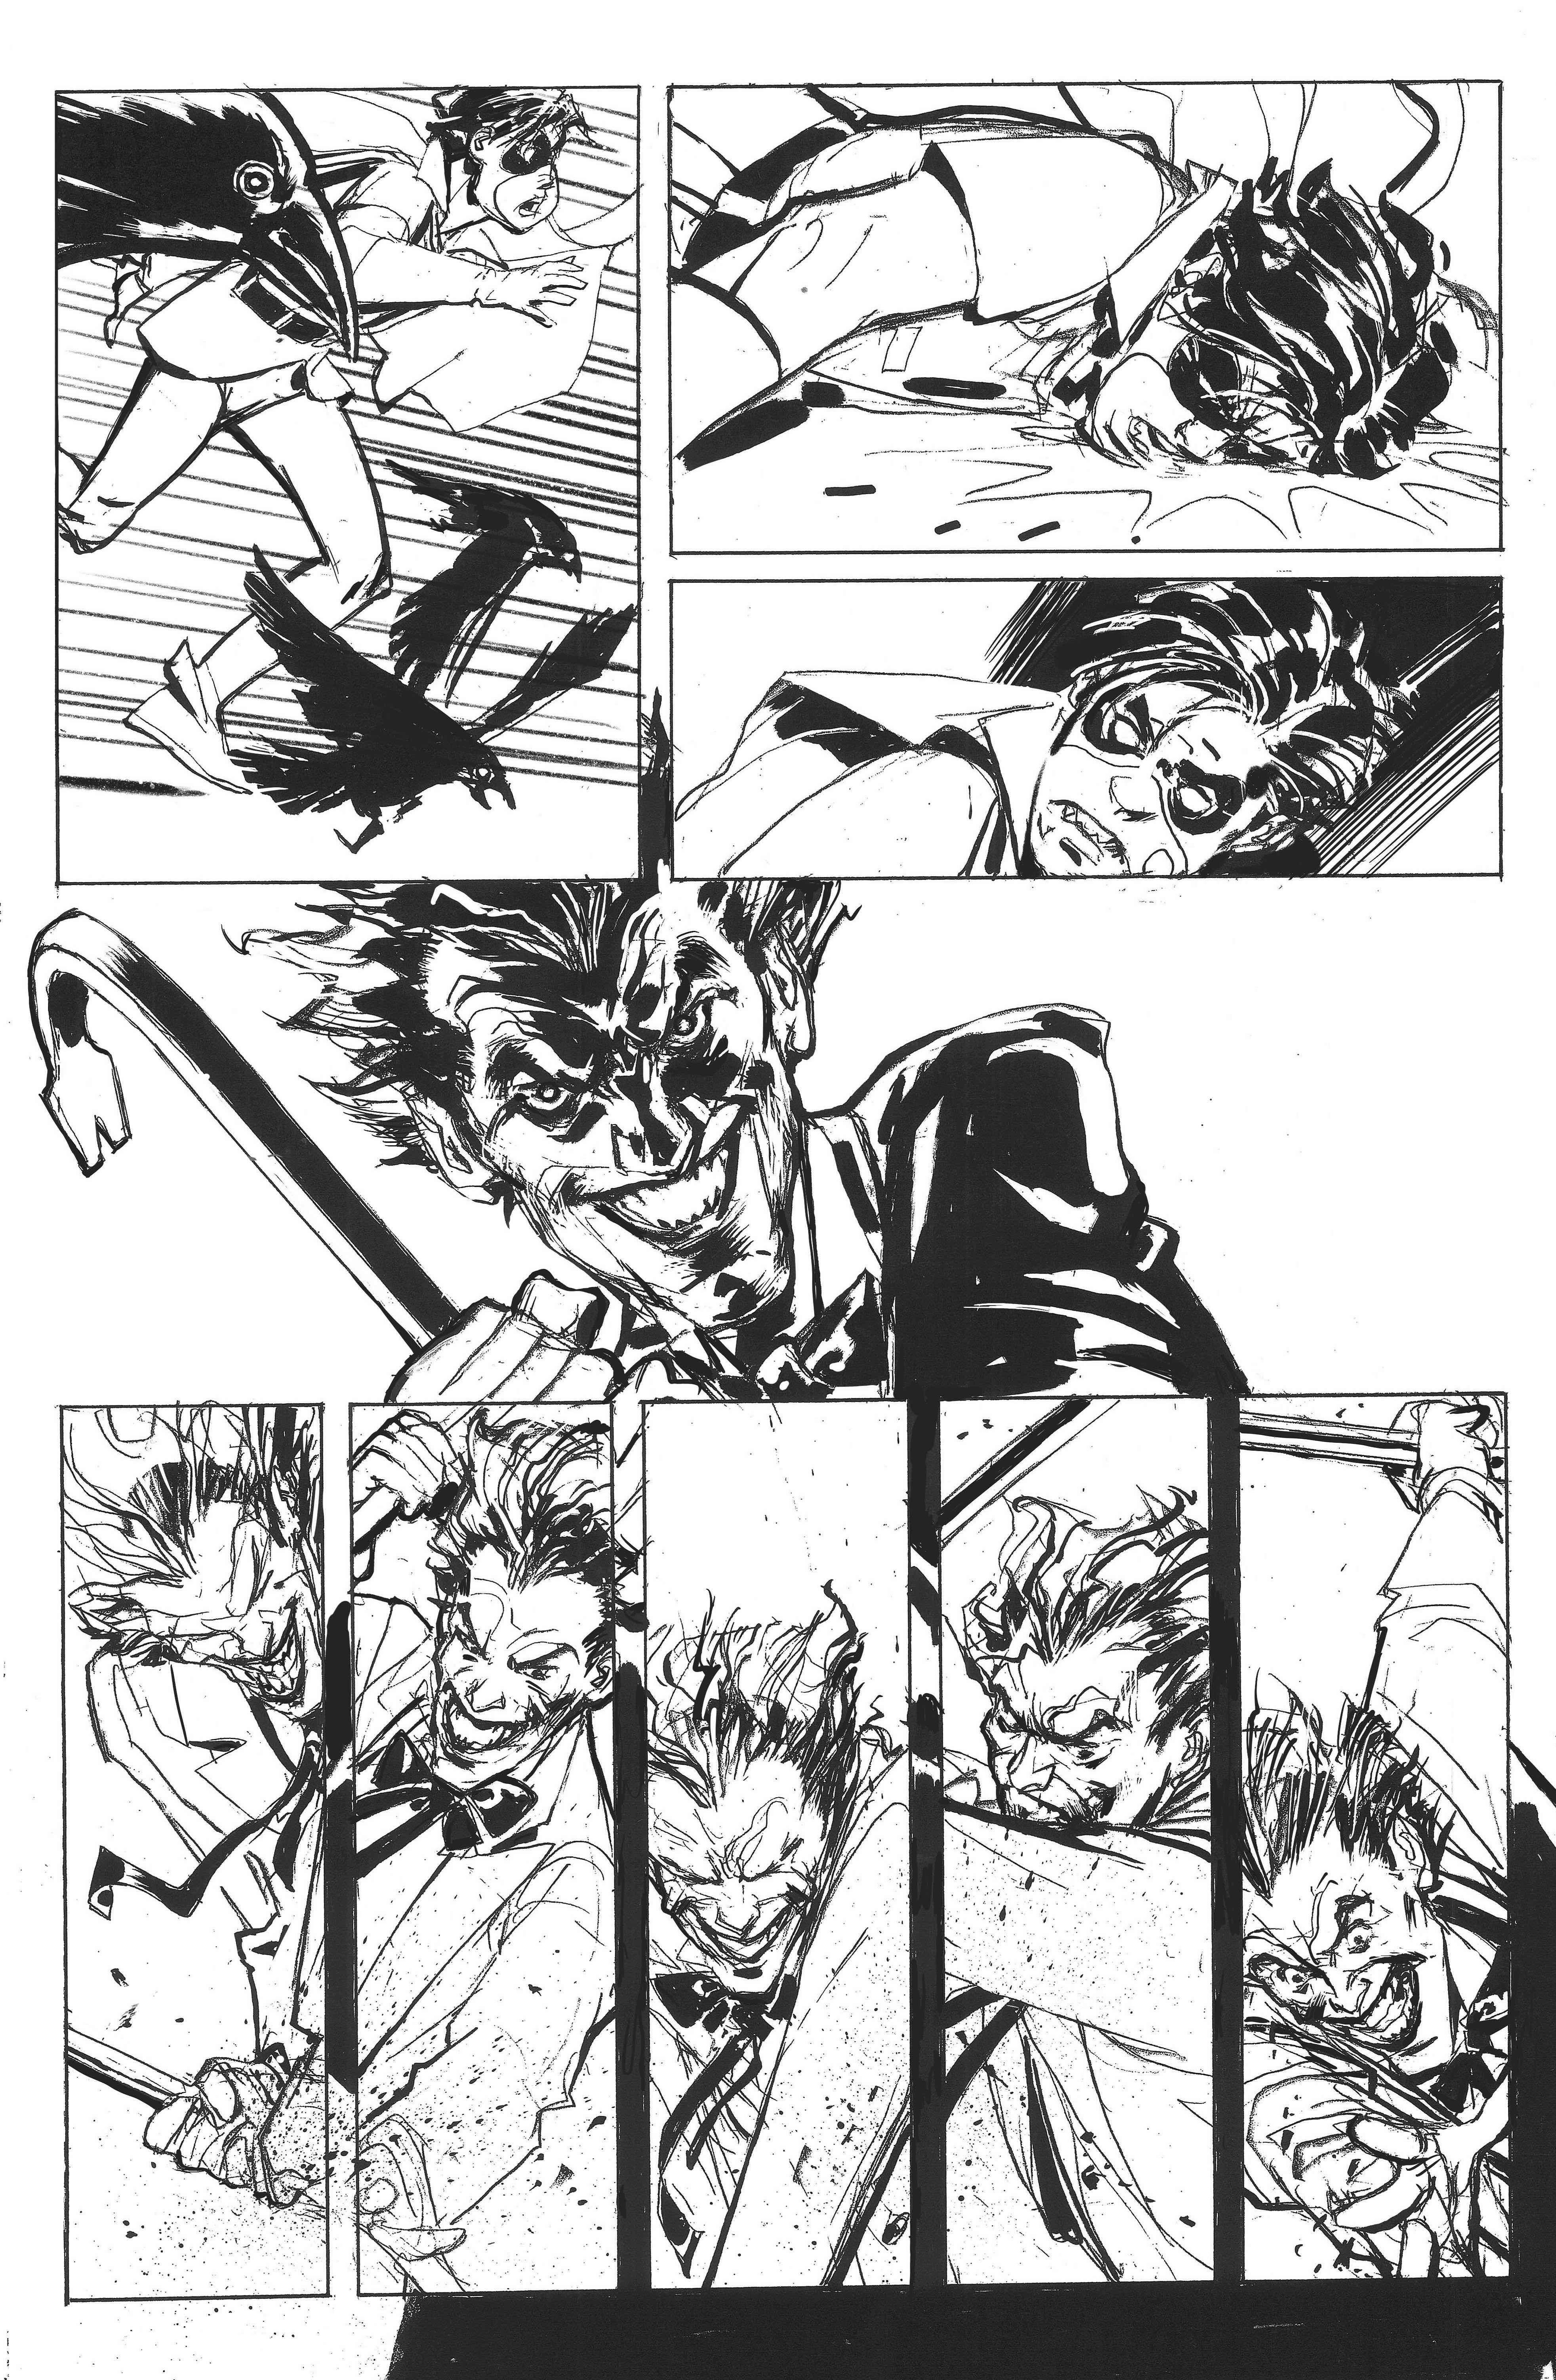 from-the-dc-vault-pencils3.jpg